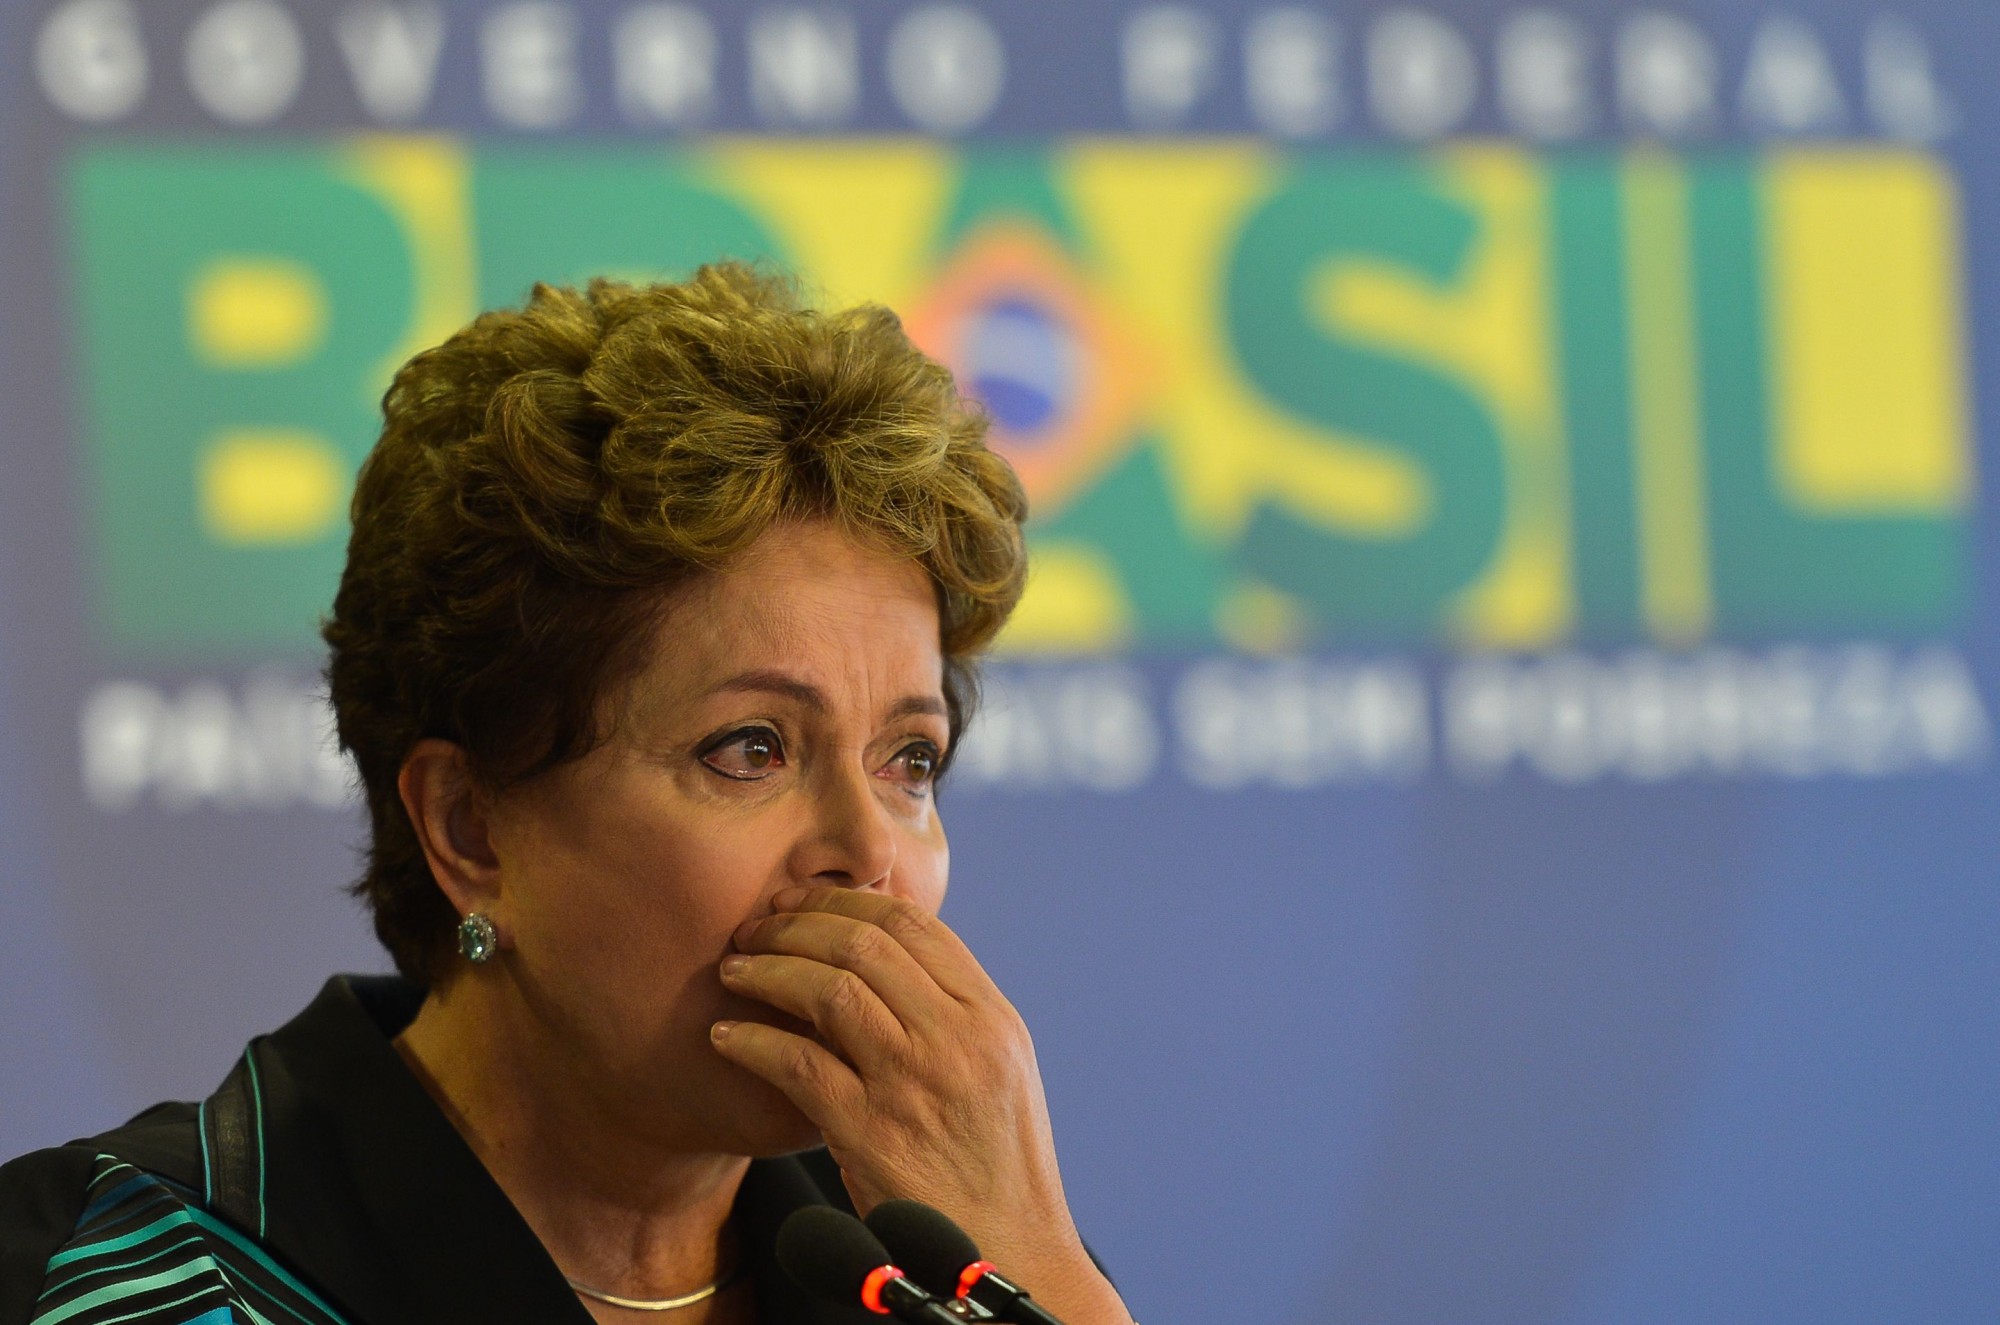 The Edge of Democracy is a documentary on Dilma Rousseff's impeachment proceeding. The film, shown at the 2019 Sundance Festival, will be available on Netflix on June 19th.